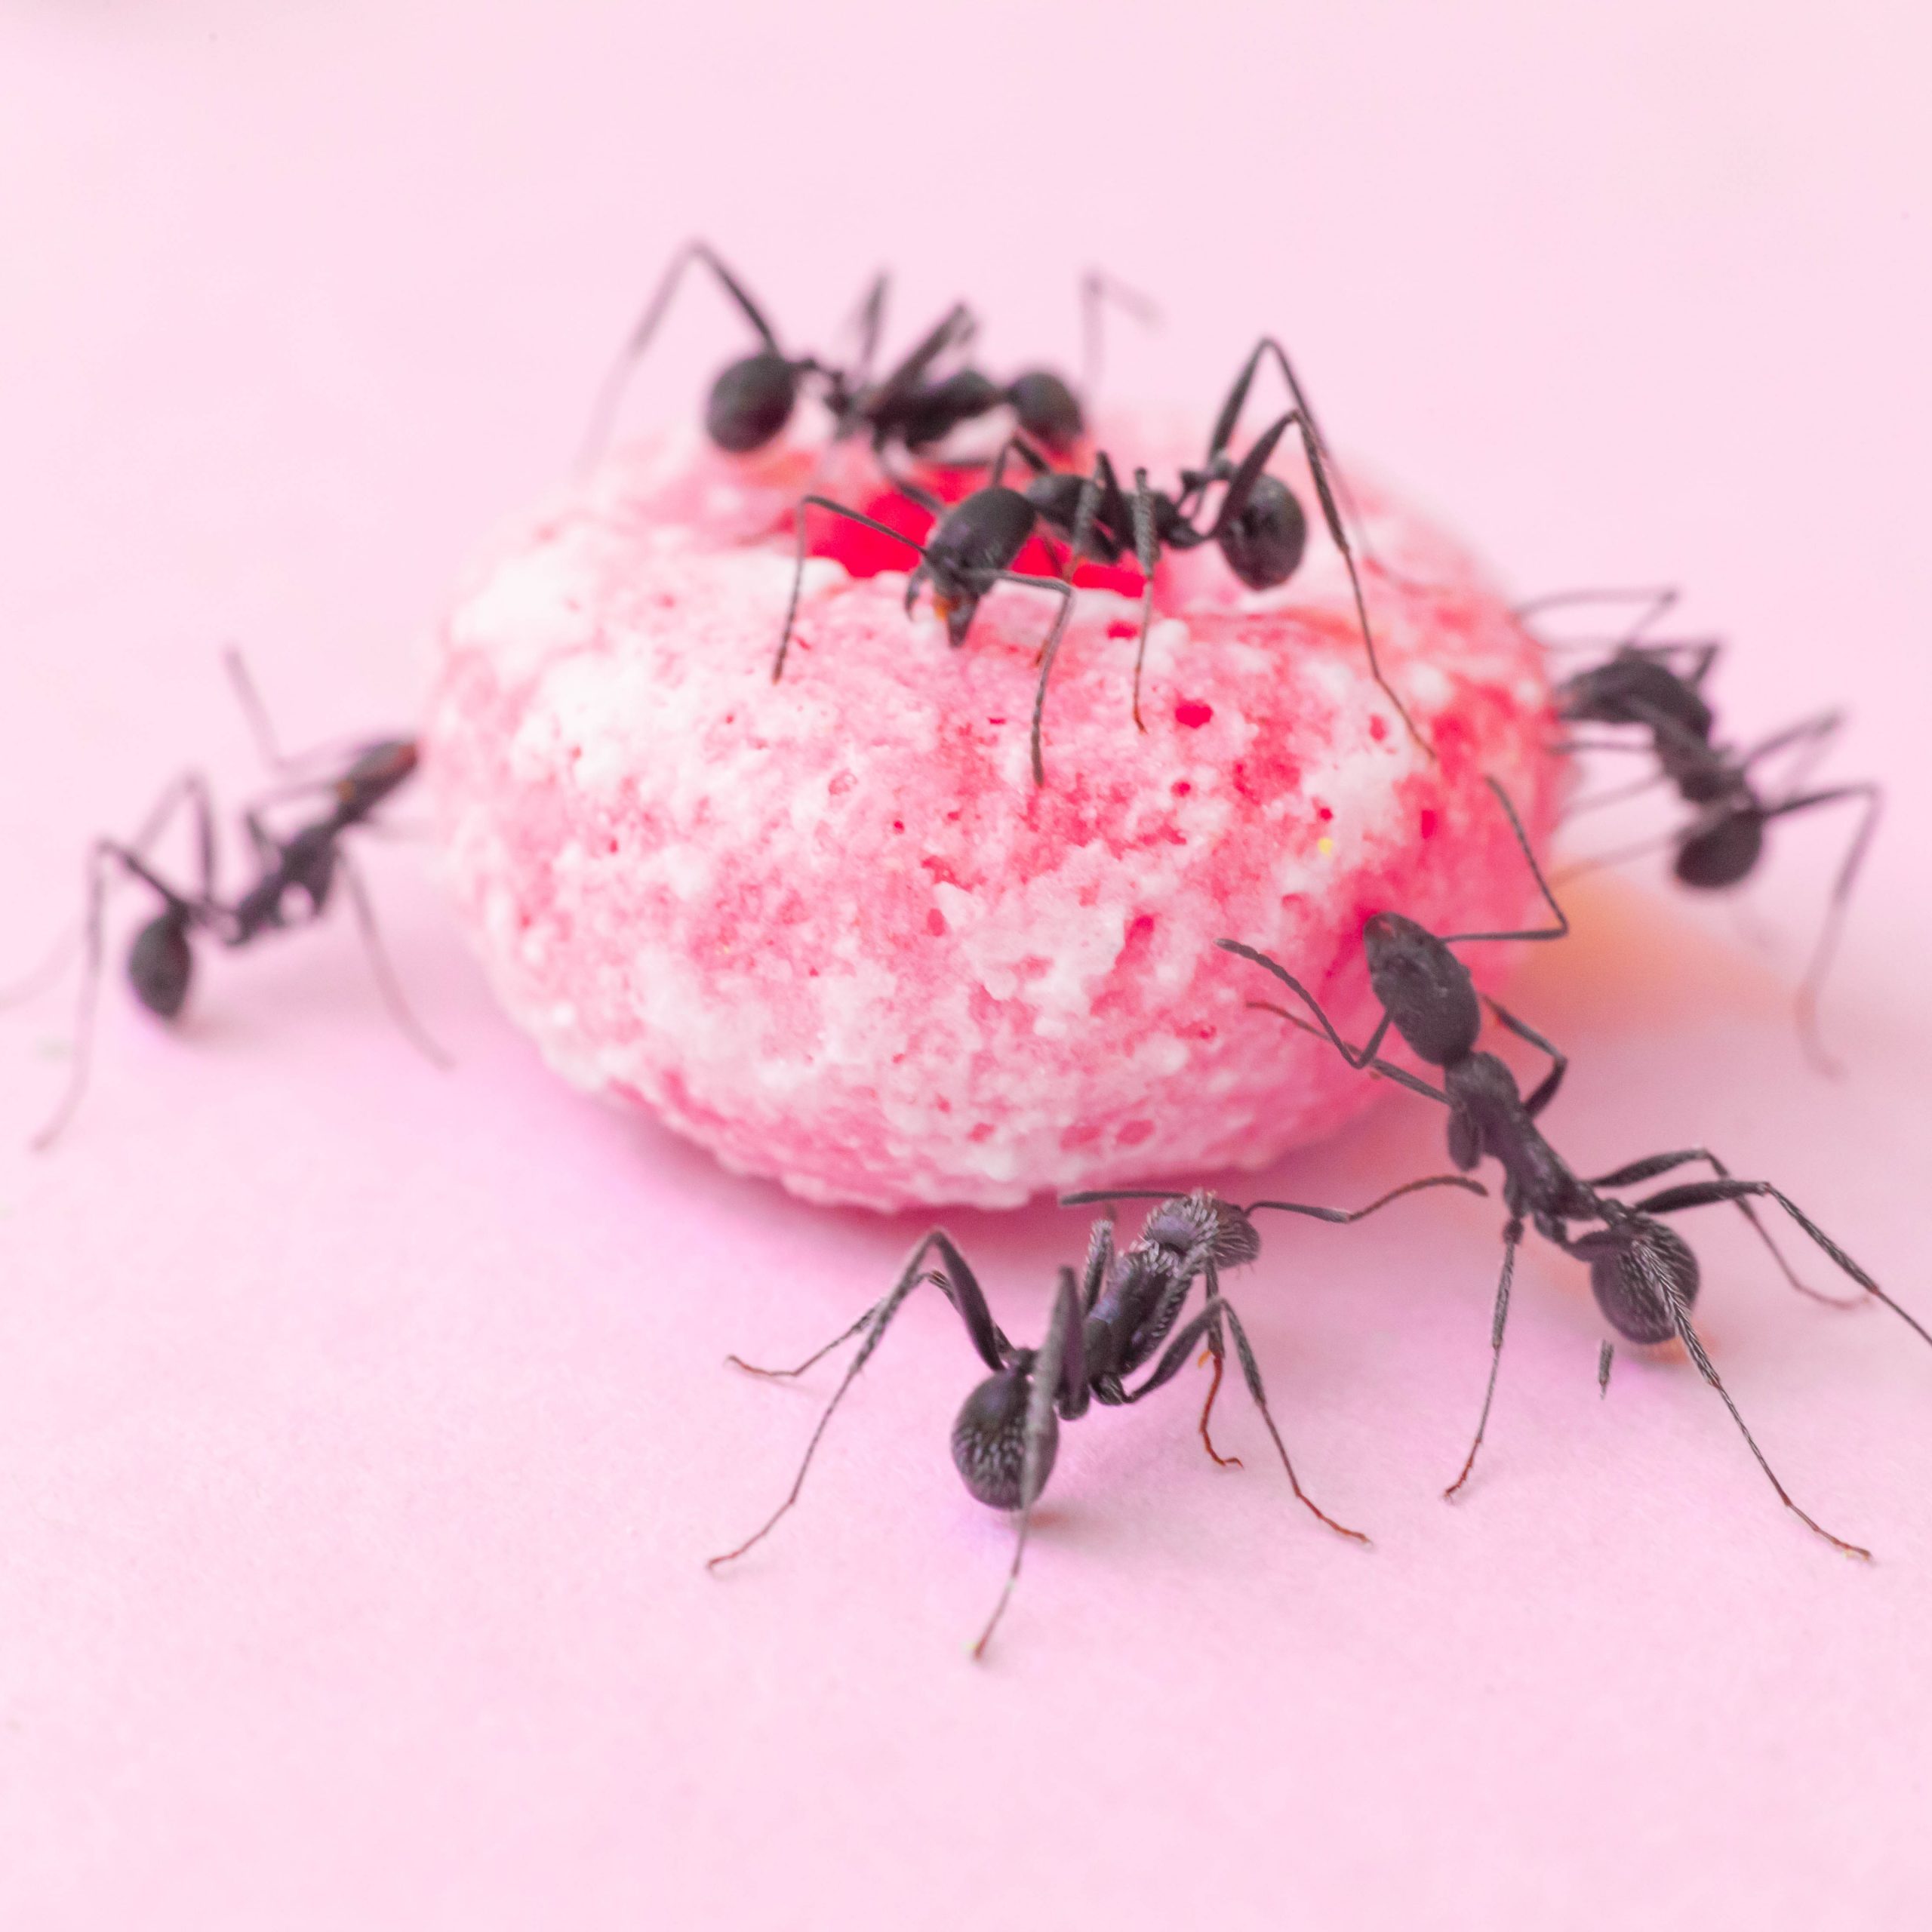 The Homeowner's Guide to Ant Pest Control